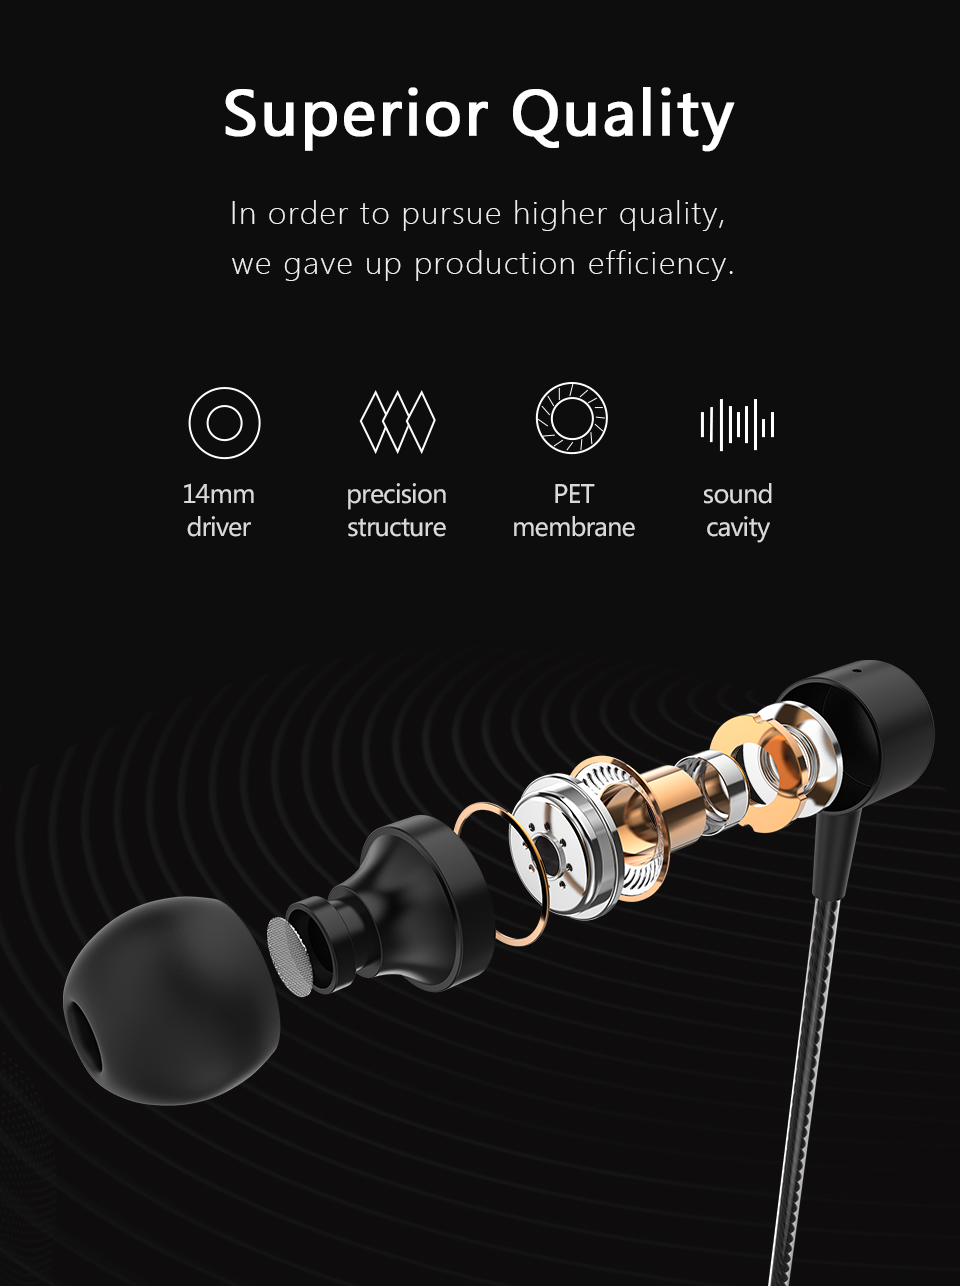 PTM-D1-Stereo-Bass-Sport-Earphone-Volume-Control-Metal-In-ear-Headphone-with-Mic-1590459-5